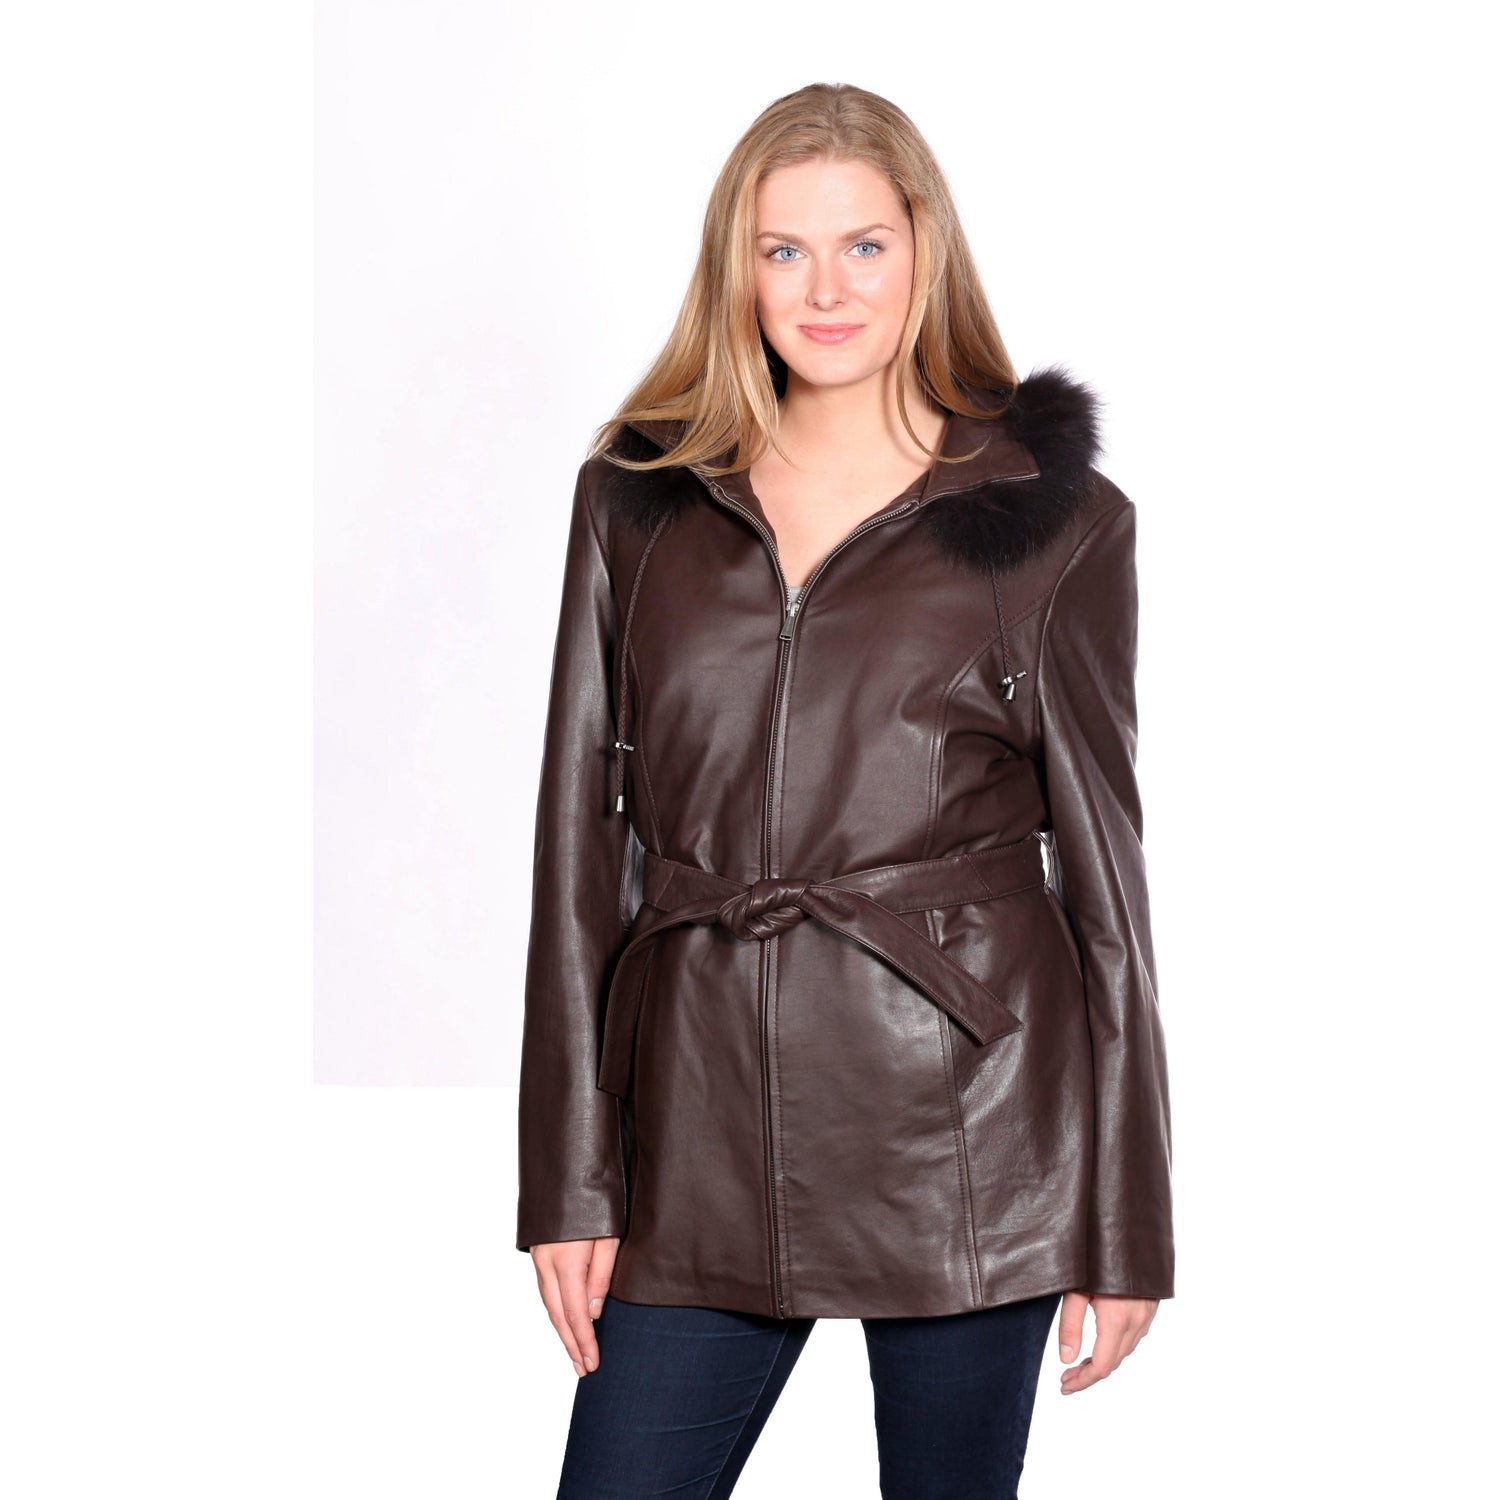 Mason & Cooper Women's Leather Jacket with Zip Out Hood - Zooloo Leather